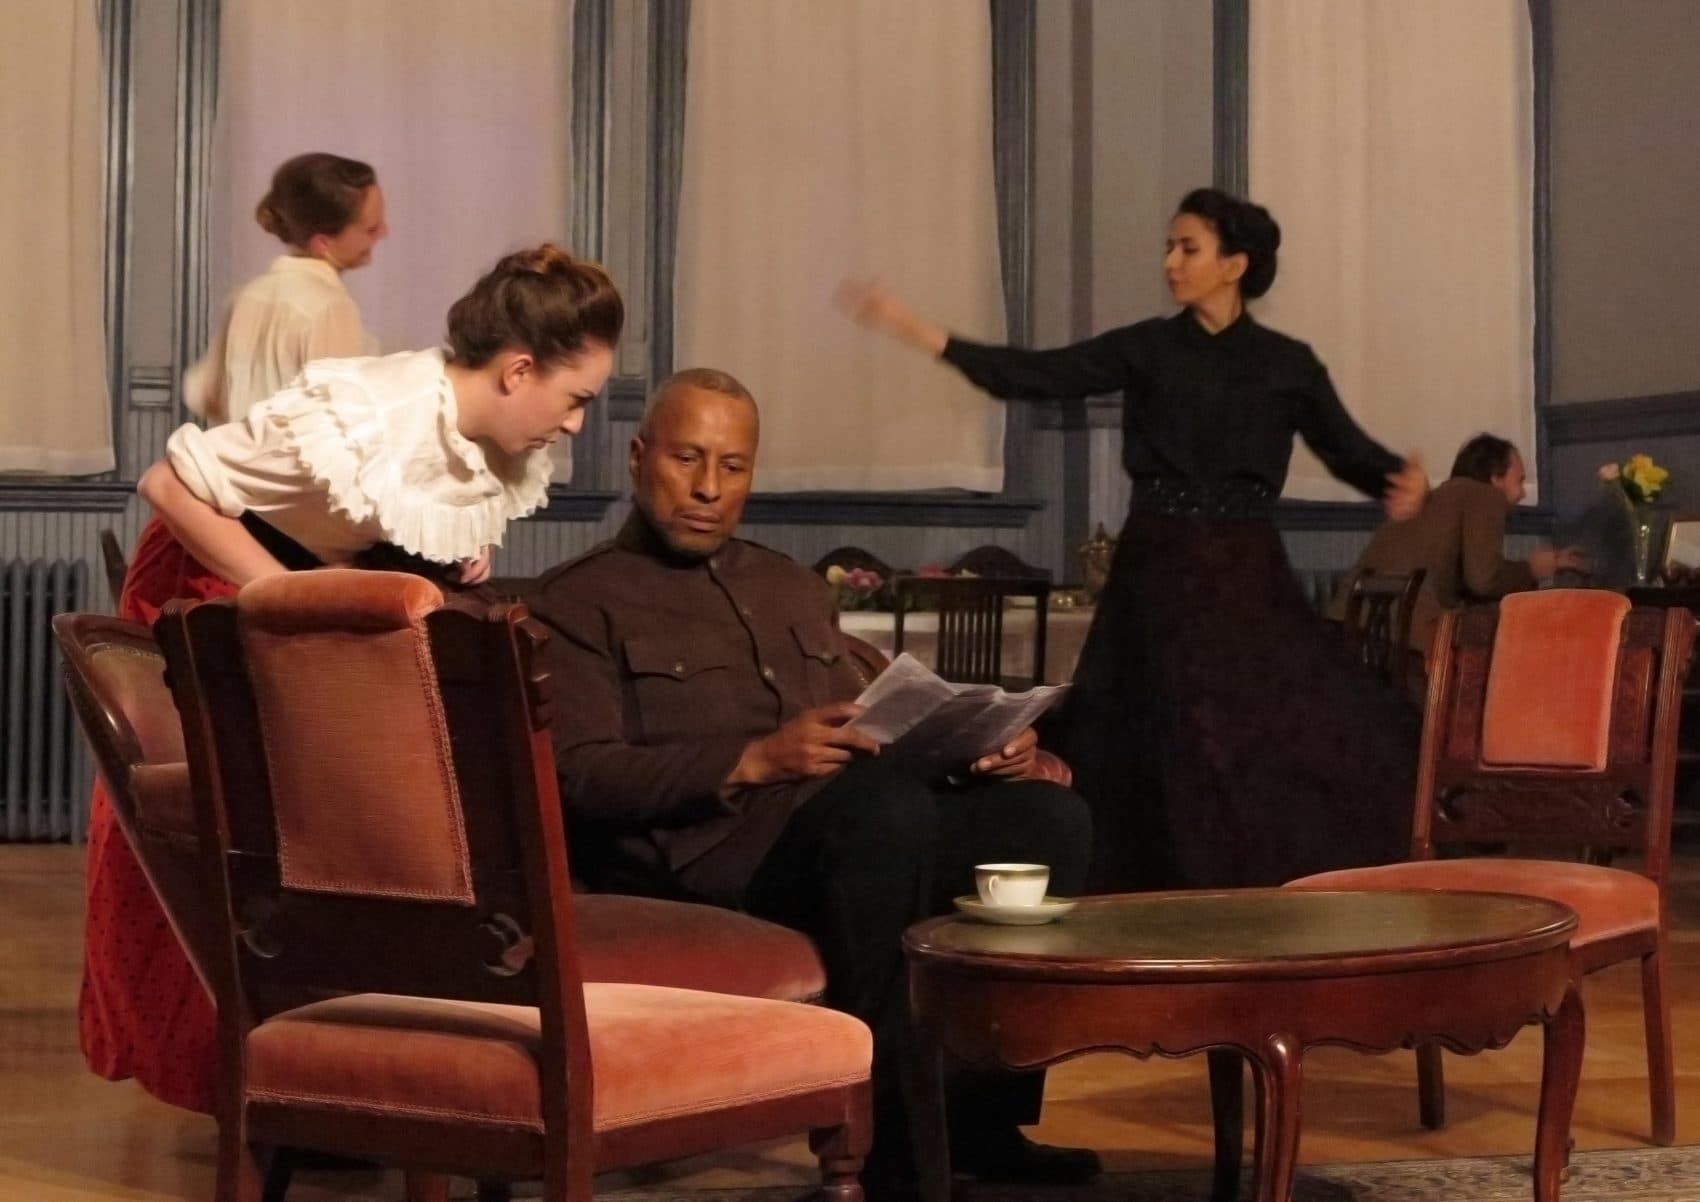 In the foreground, Olivia Dumaine as Natasha and Paul Benford-Bruce as Chebutykin. In the background, Siobhan Carroll as Irina, Deniz Khateri as Masha and Slava Tchoul as Fedotik US in &quot;Three Sisters.&quot; (Courtesy Danielle Fauteux Jacques)